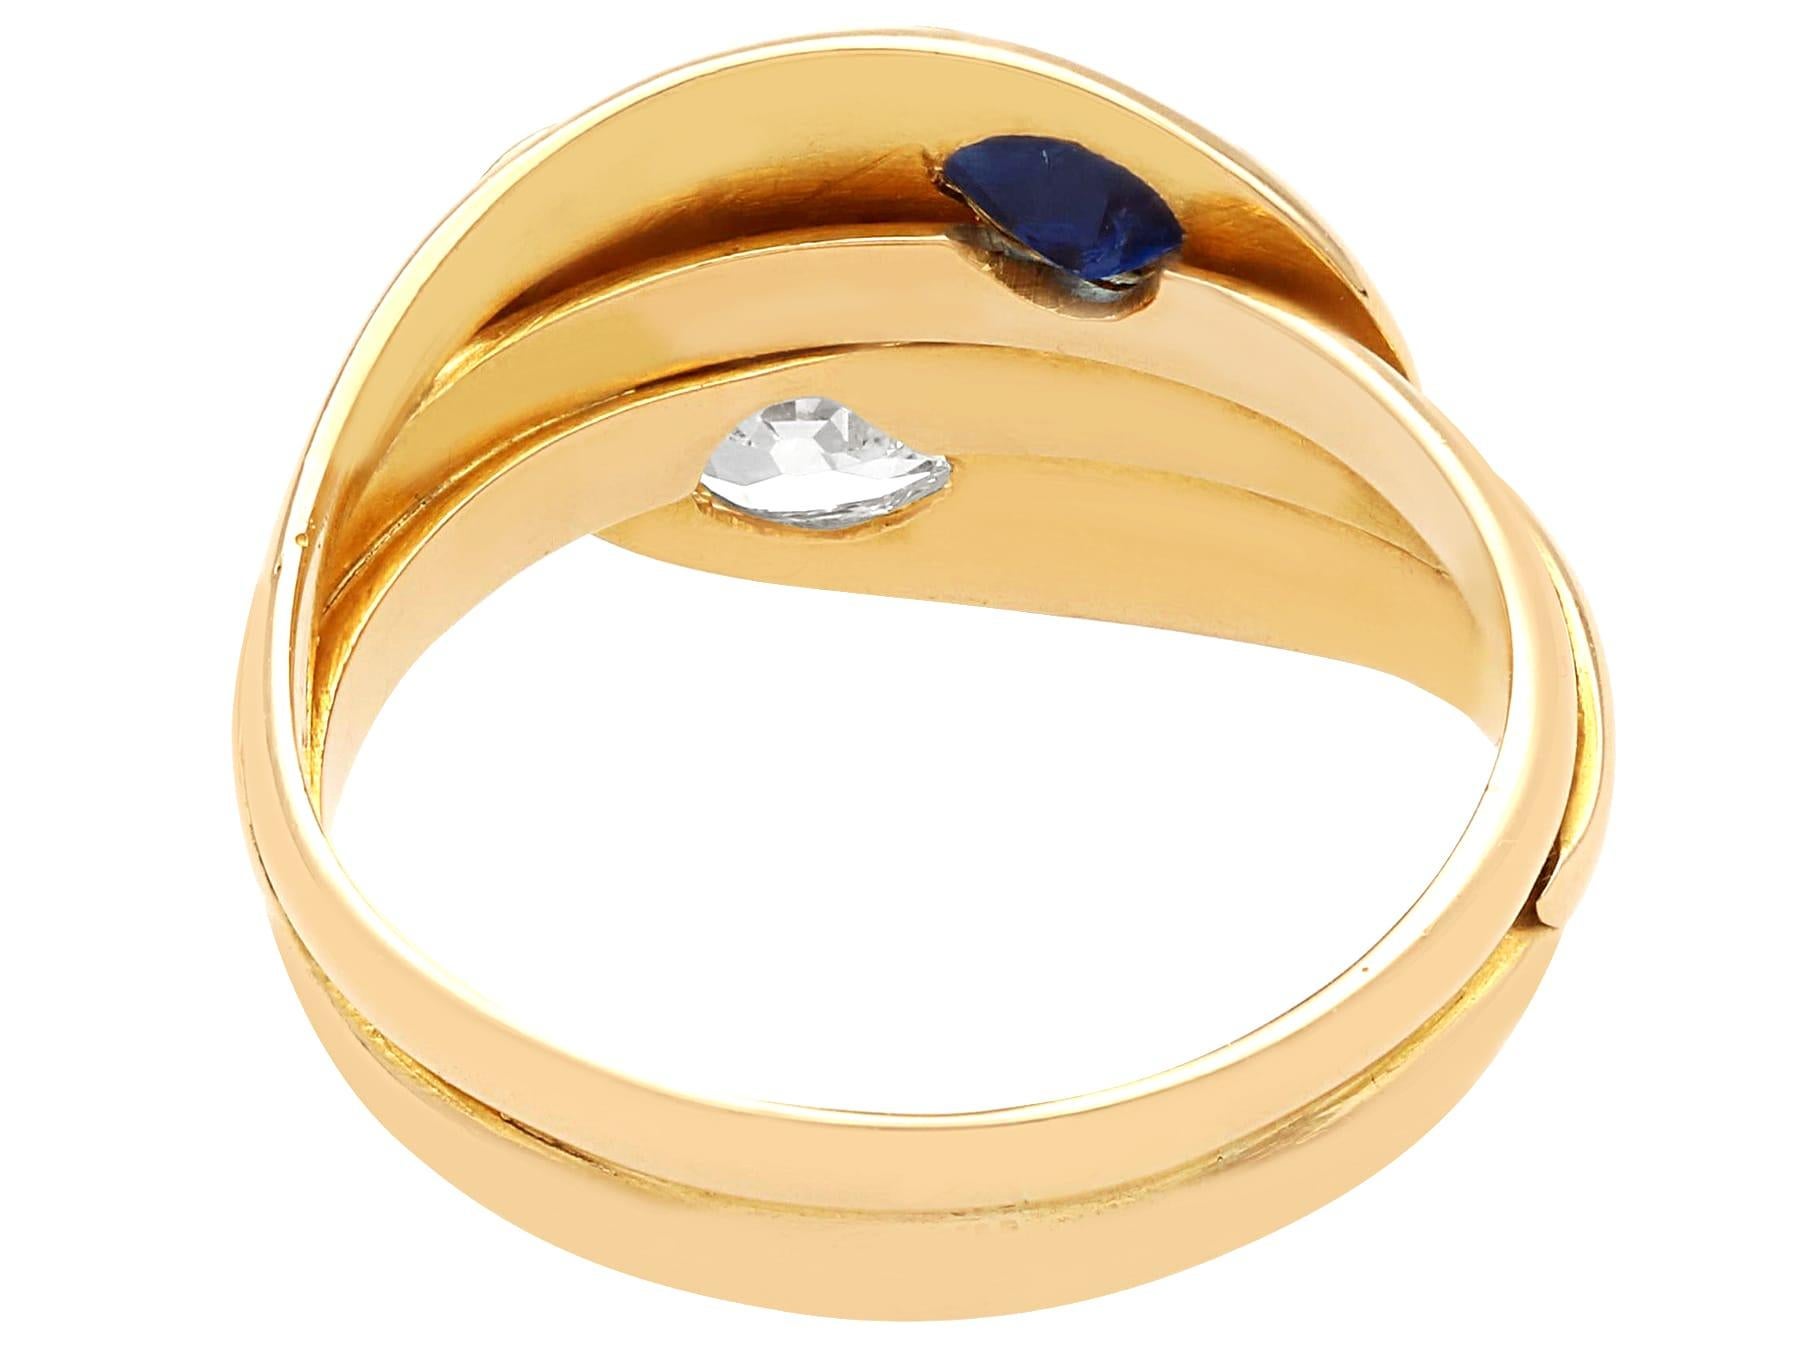 Antique 0.63 Ct Sapphire and 0.77 Ct Diamond, 18 Ct Yellow Gold Snake Ring In Excellent Condition For Sale In Jesmond, Newcastle Upon Tyne